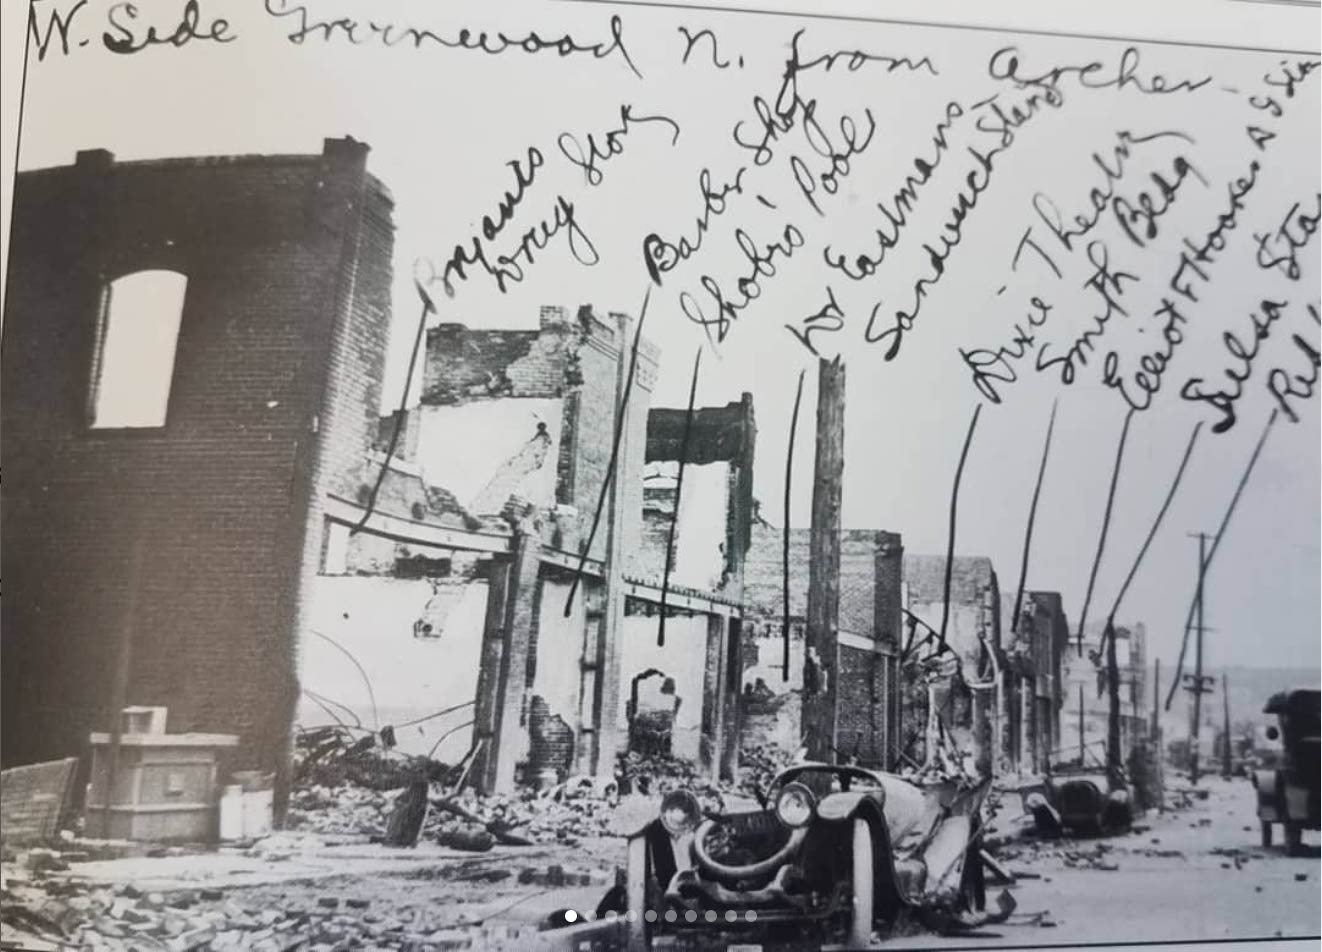 A photograph of the devastation that occurred to Black Wall Street on the north side of Greenwood Avenue in Tulsa, Oklahoma, with the handwritten names of the businesses that were destroyed.